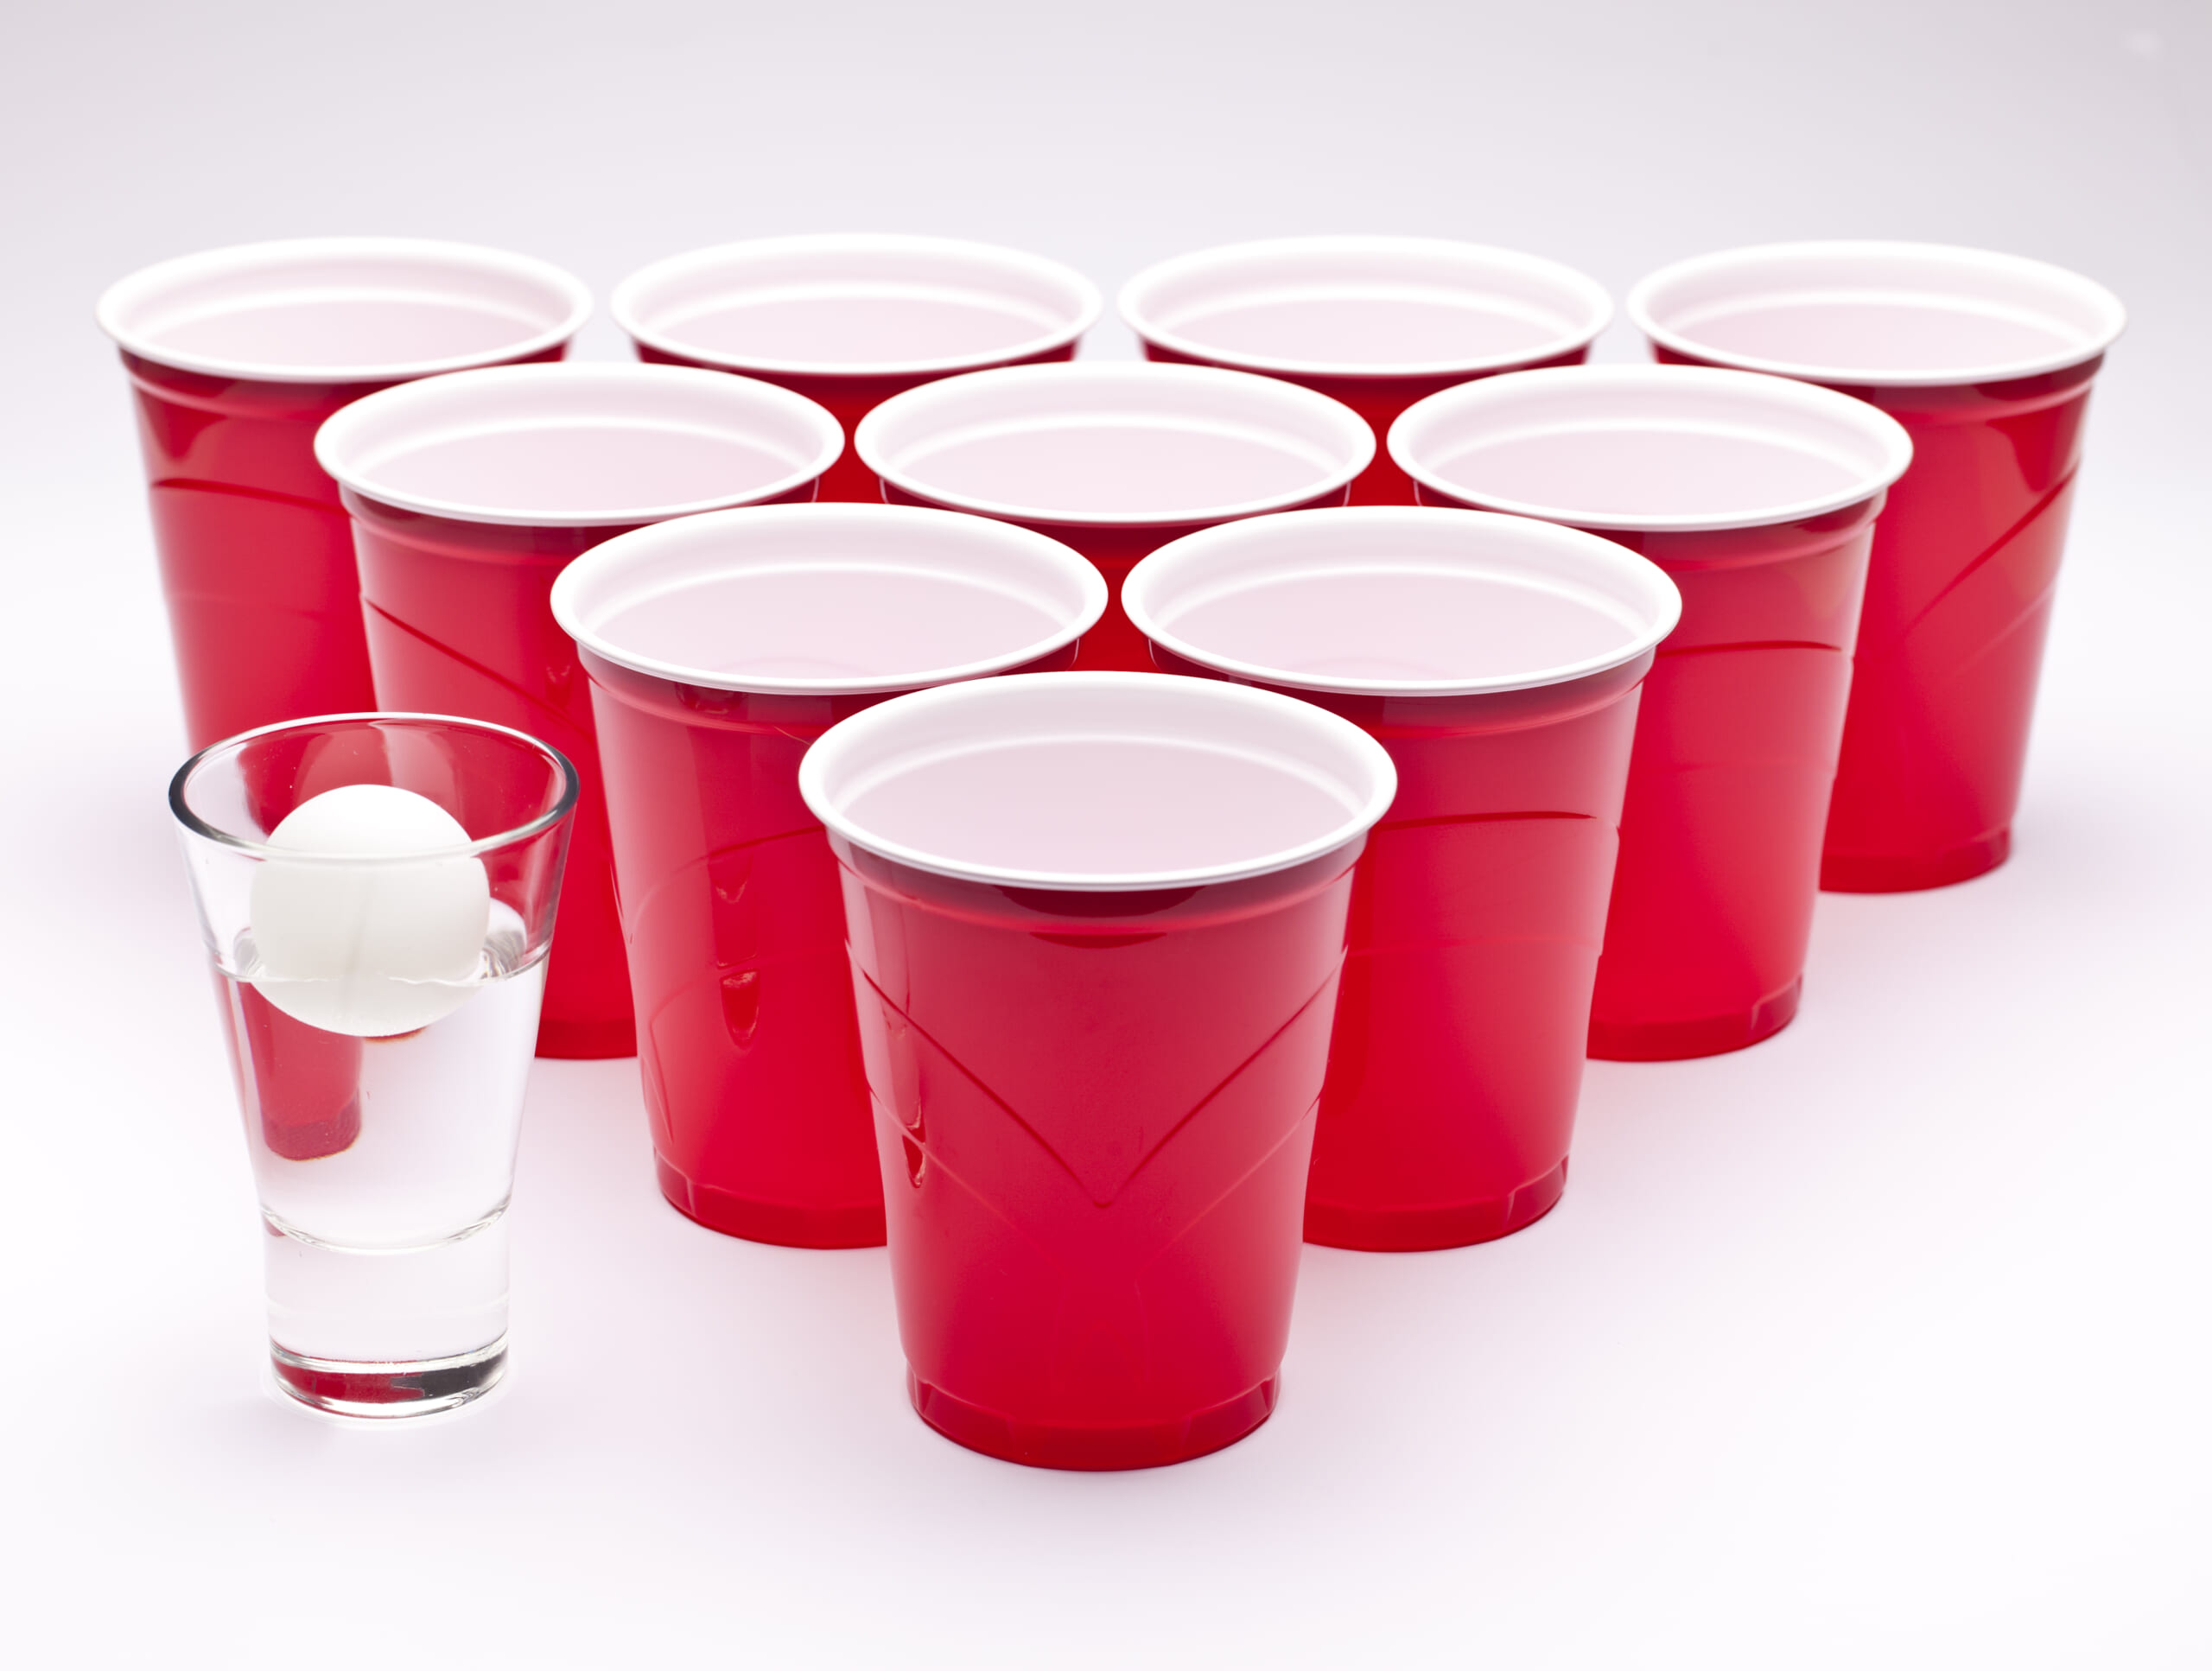 Pour One Out To Remember the Inventor of the Iconic Red Solo Cup - Maxim